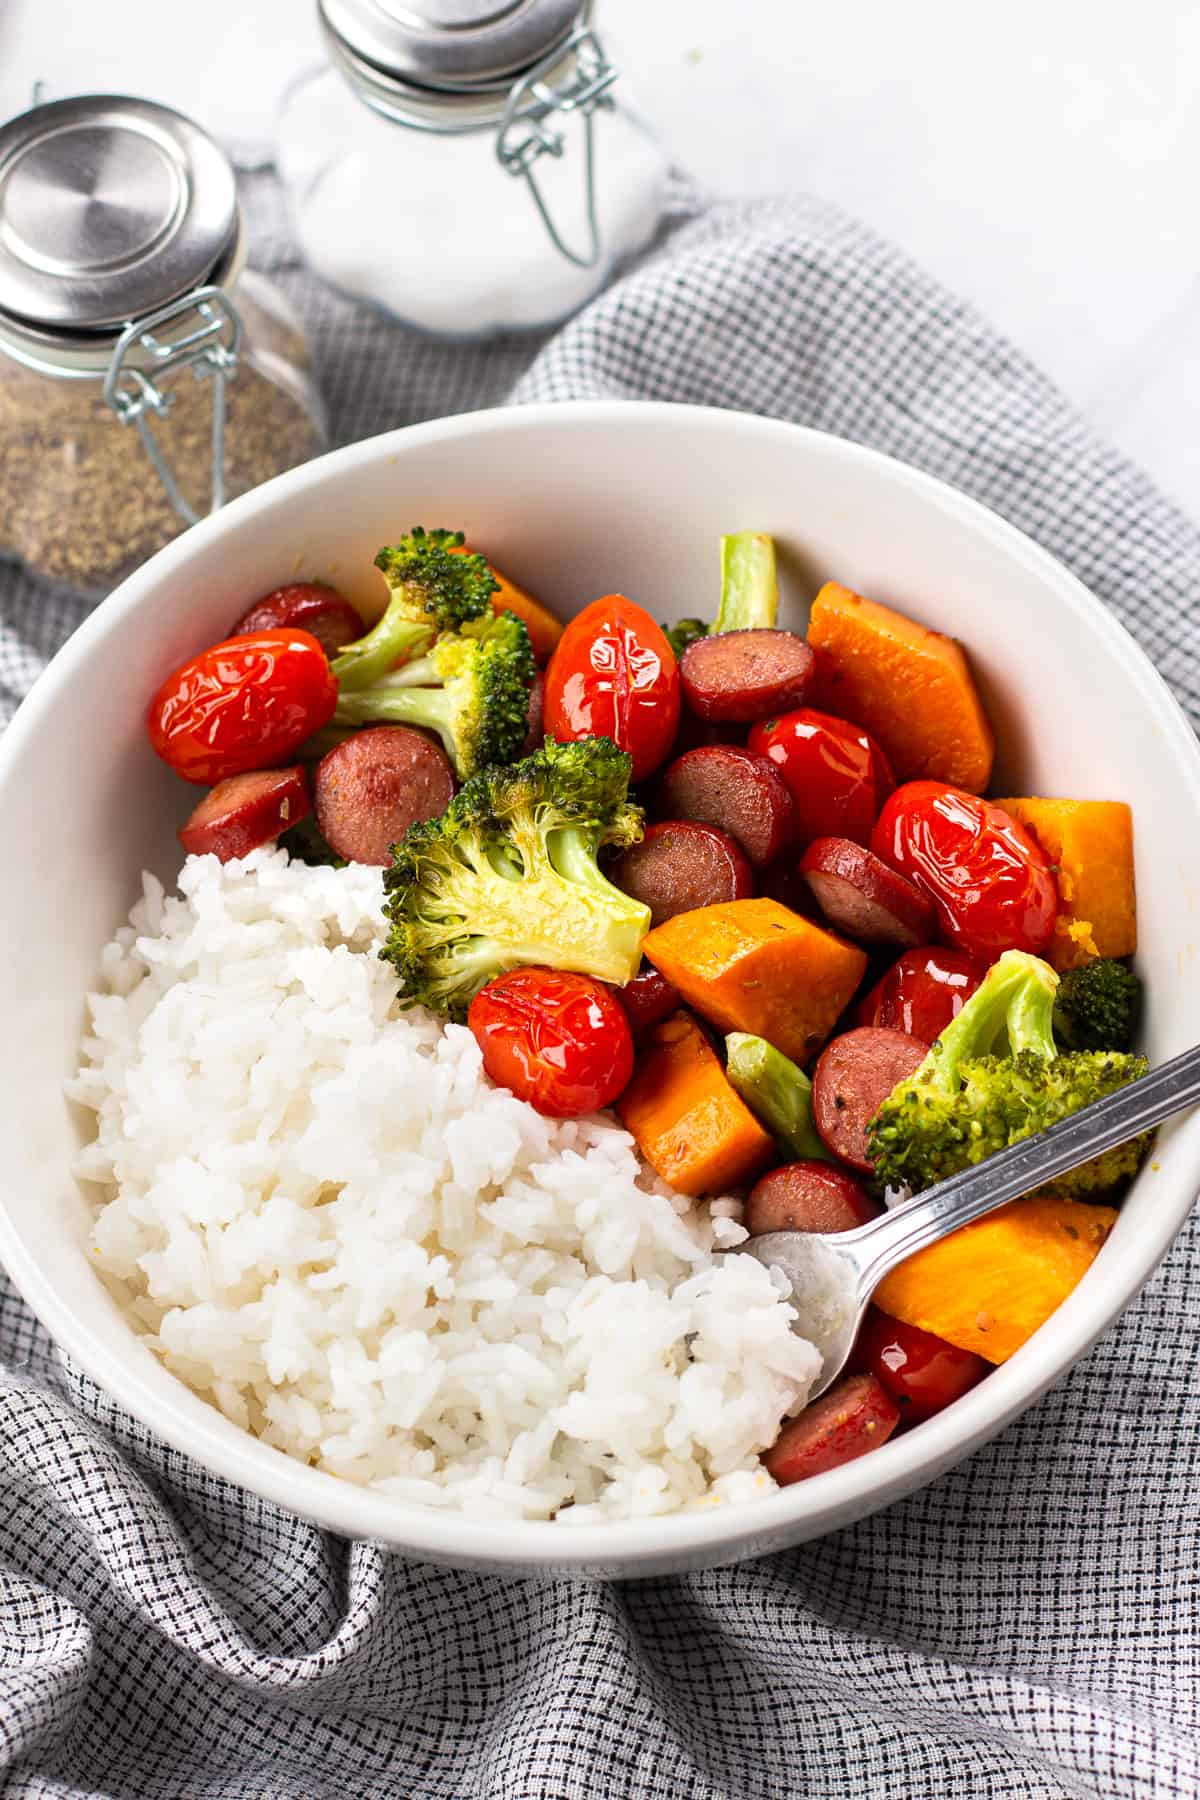 Roasted vegetables and sausage with white rice in a white bowl.